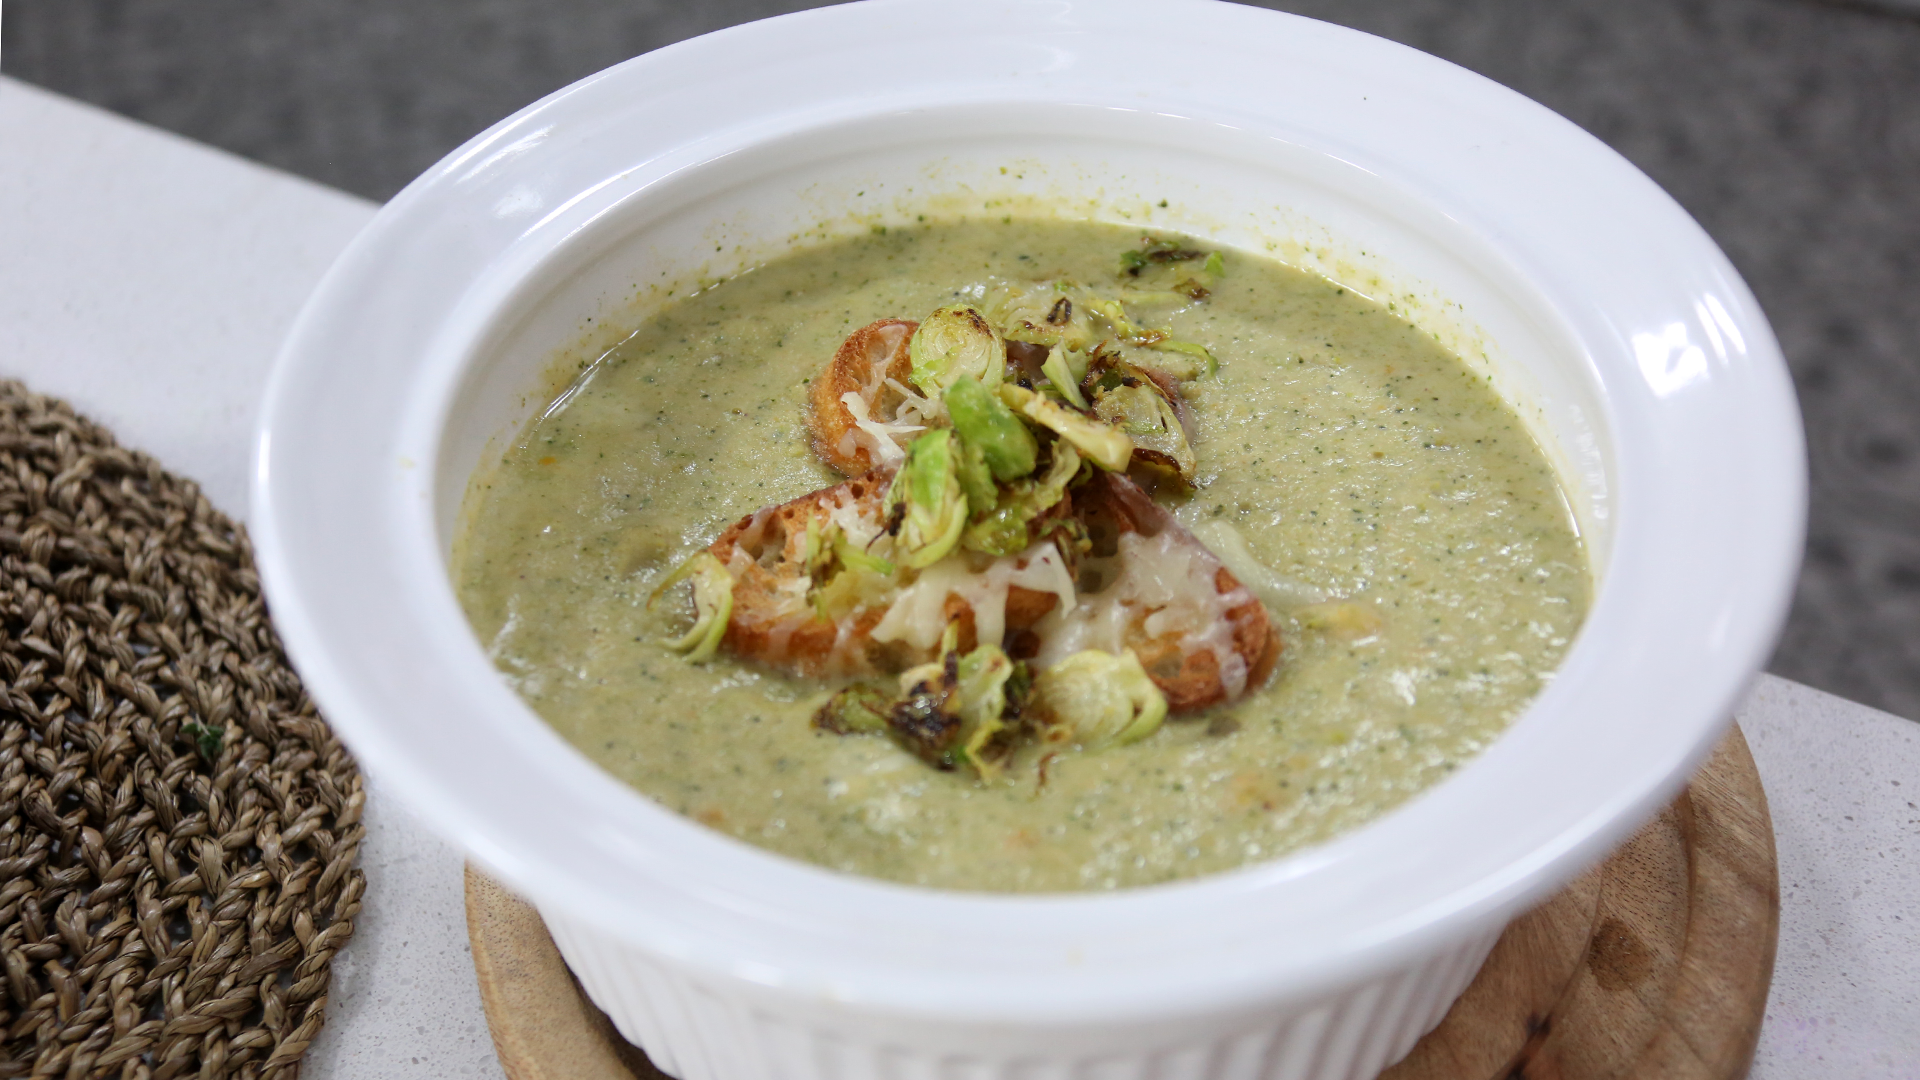 Cream of broccoli soup with gruyere croutes and crispy brussels sprouts